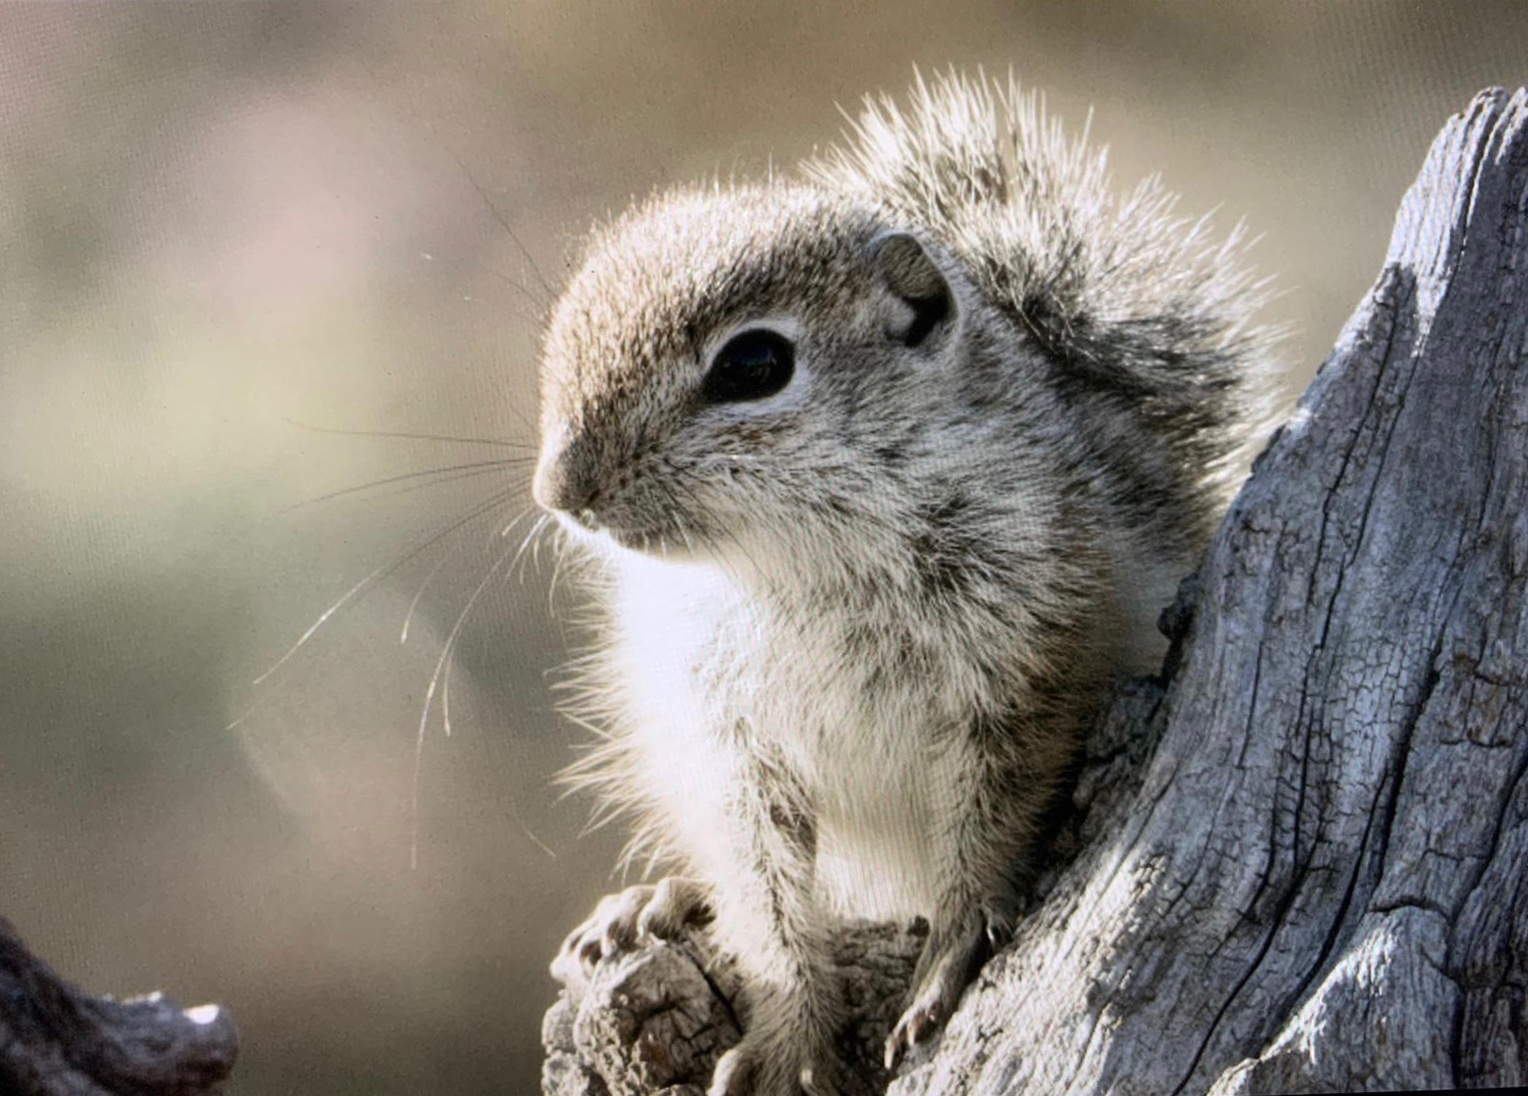 Juvenile ground squirrel looks at camera from tree